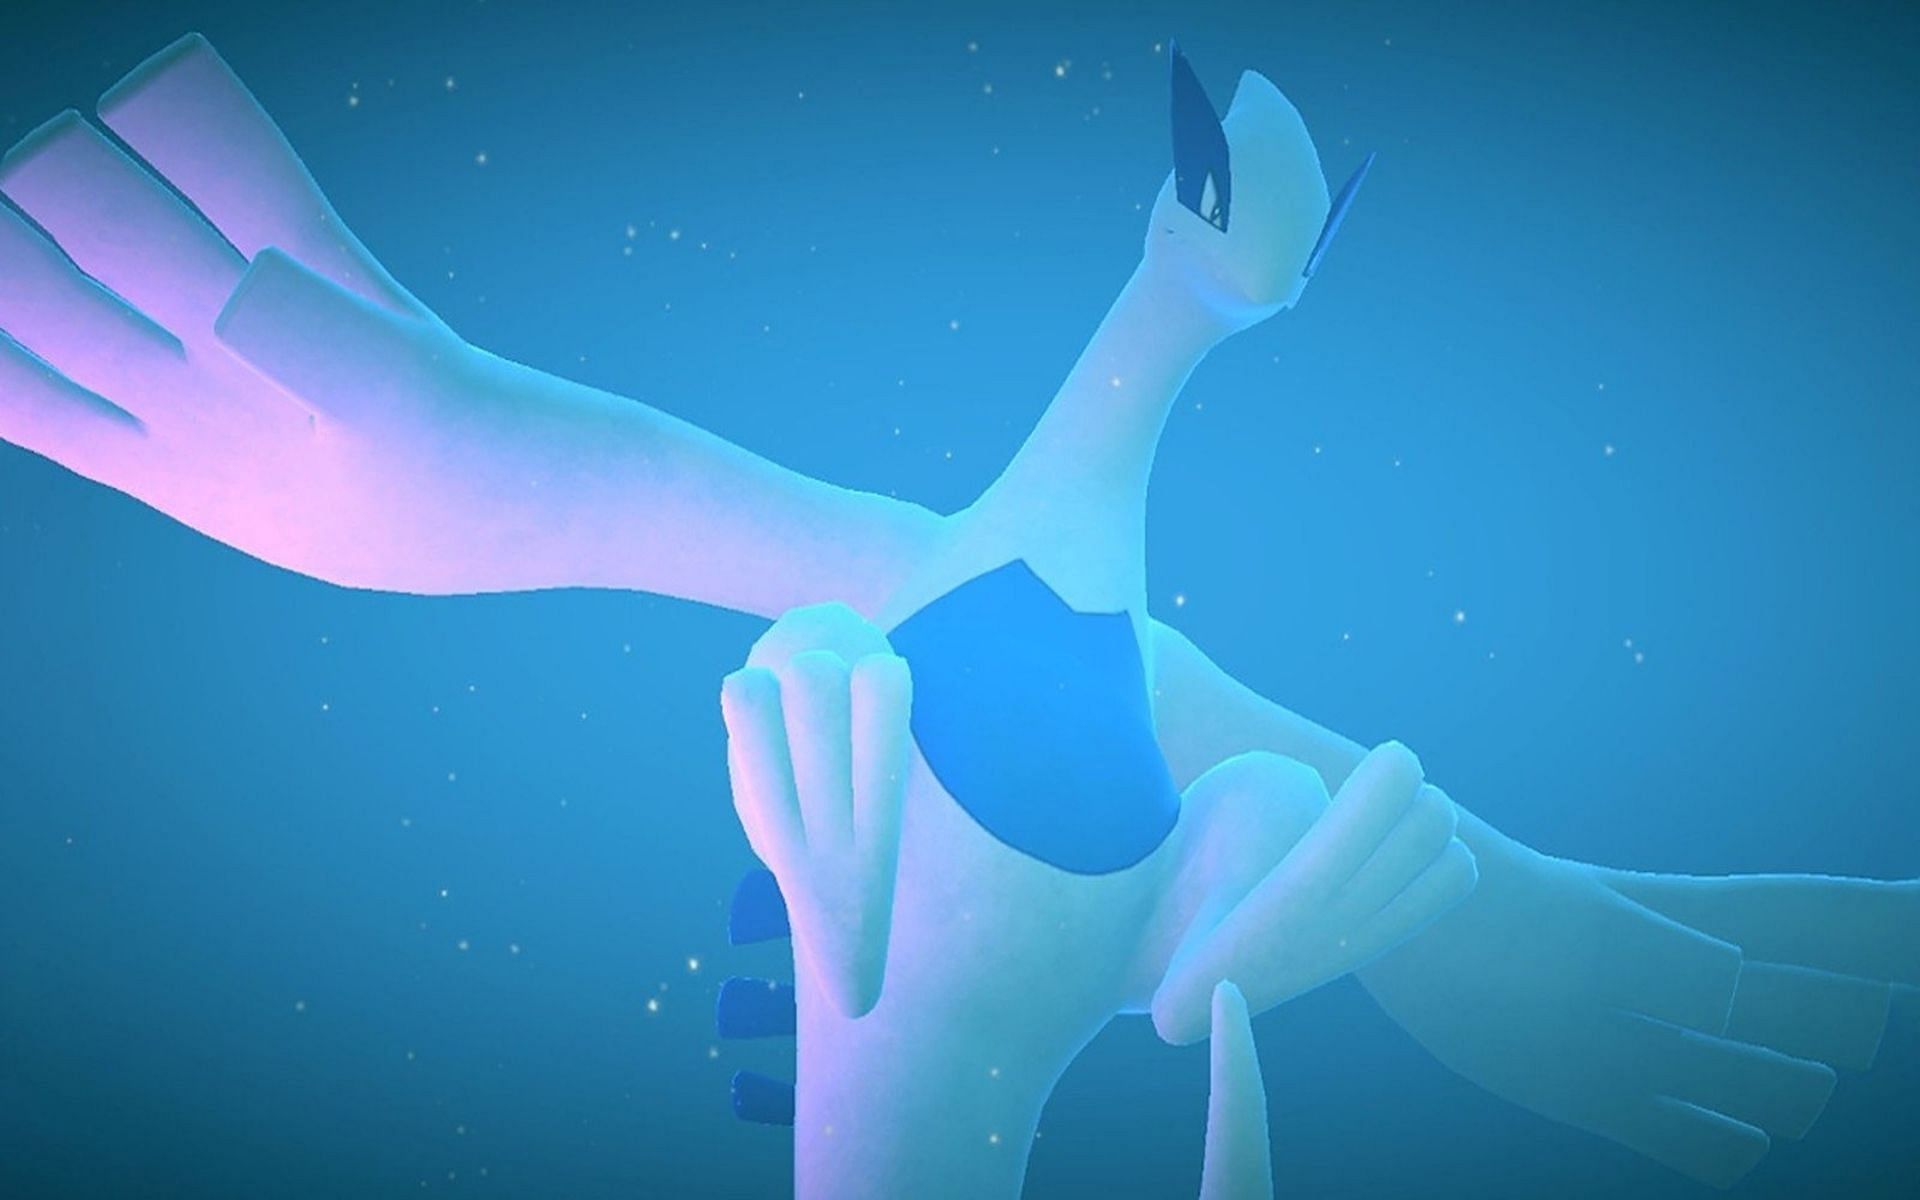 Lugia has made several appearances in spin-off games, including New Pokemon Snap (Image via Bandai Namco Studios)